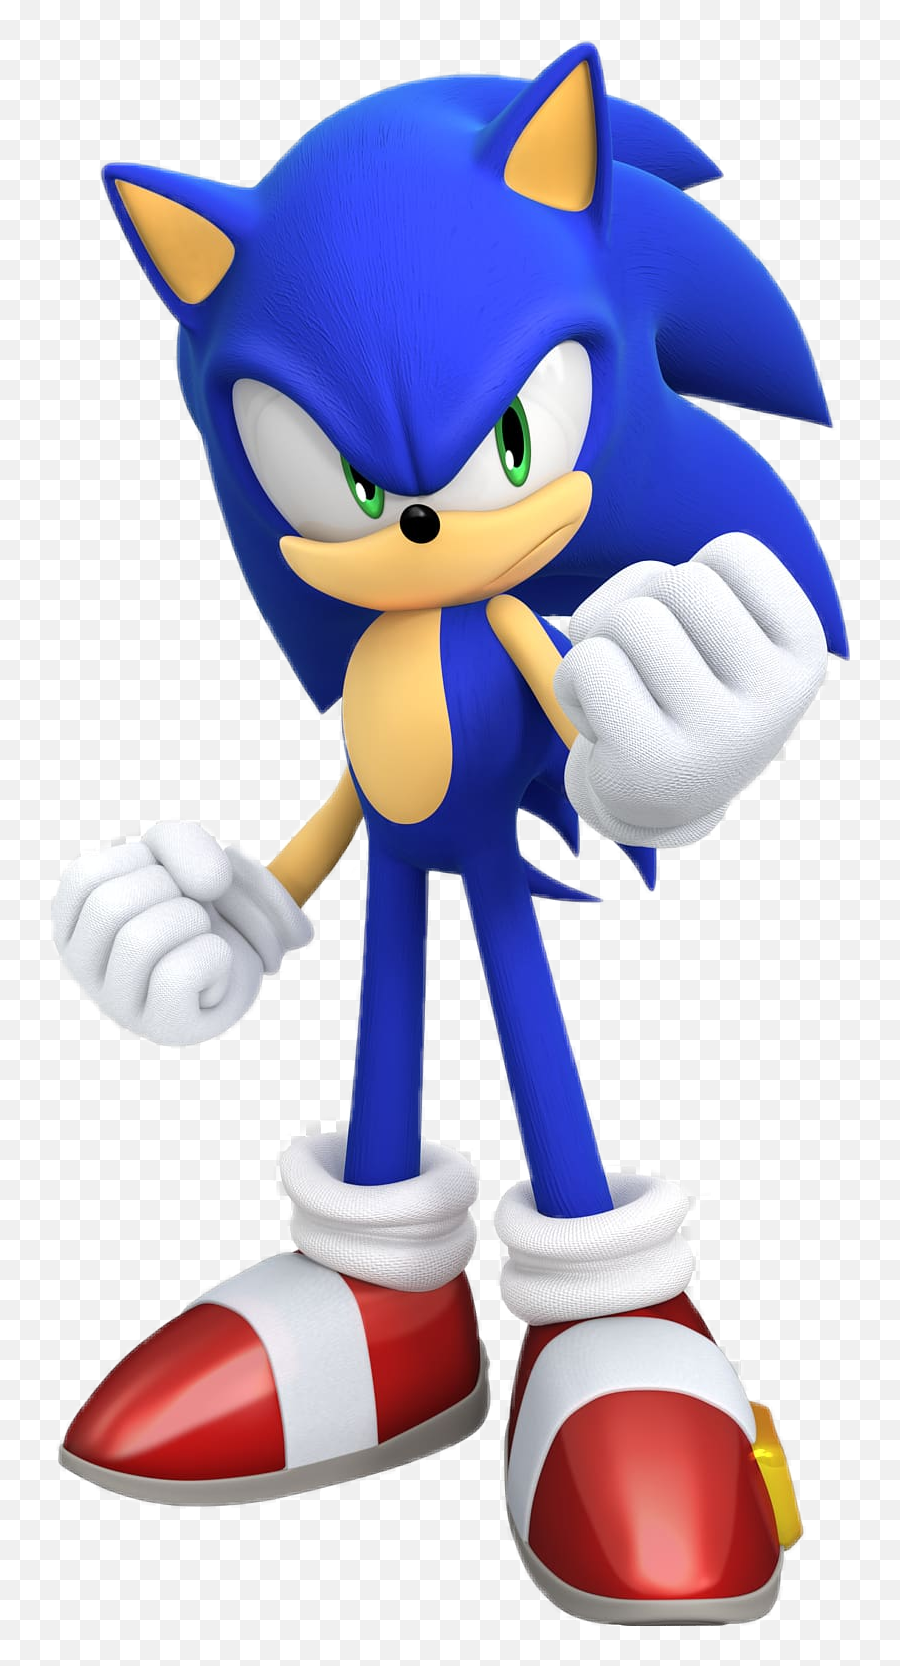 Sonic The Hedgehog No Sticker - Sonic Forces Sonic The Hedgehog Emoji,Sonic The Hedgehog Emojis